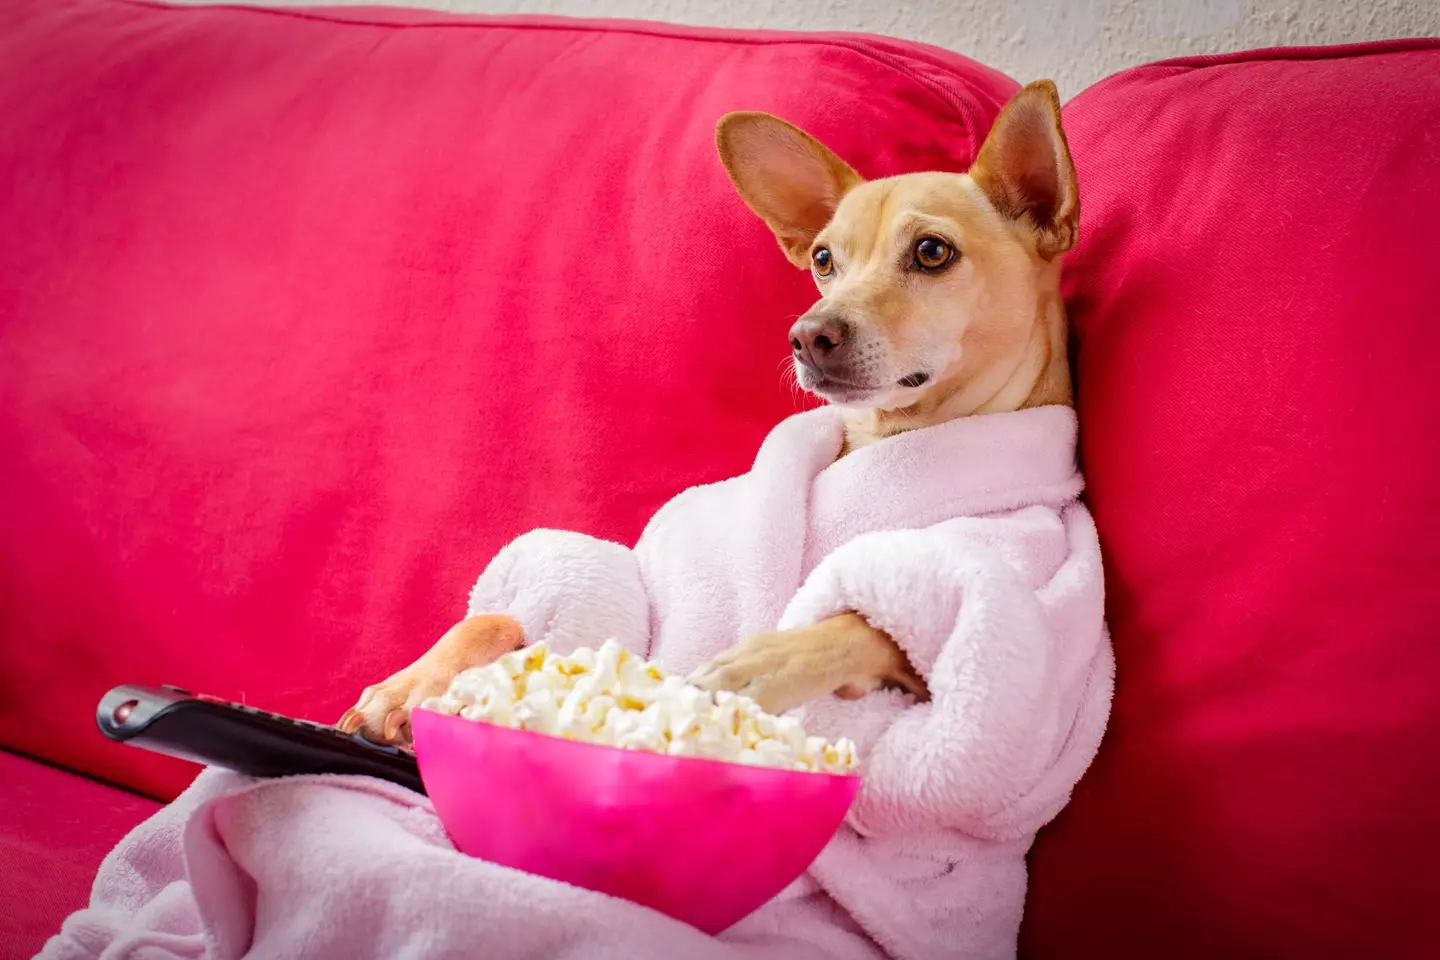 A TV channel for dogs is launching in the UK (